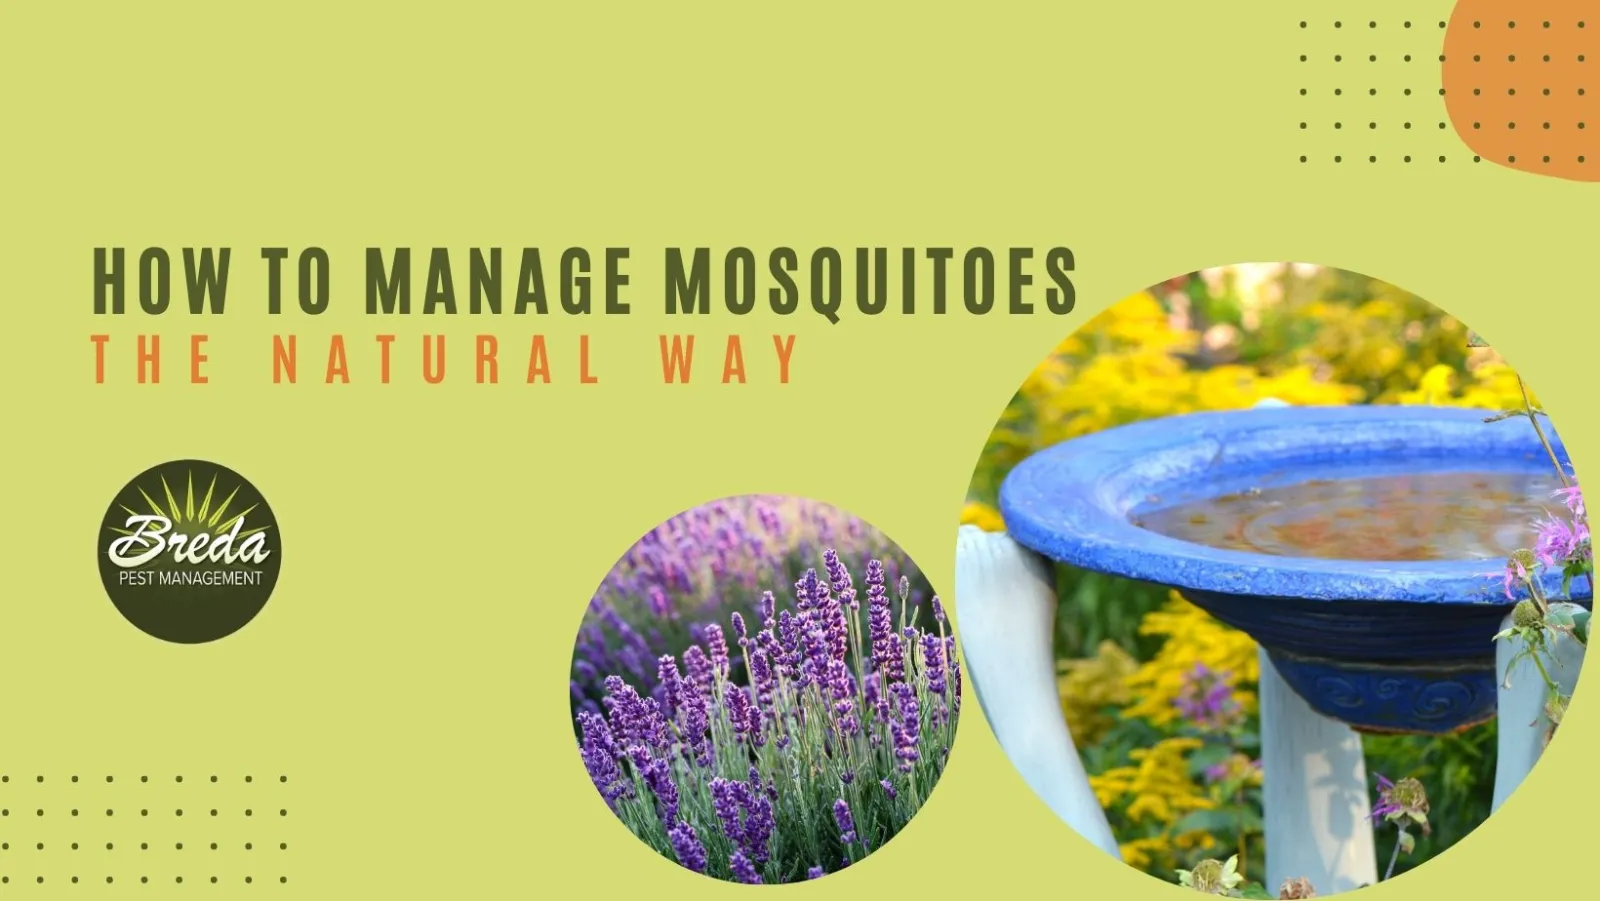 Title graphic: How to manage mosquitoes the natural way